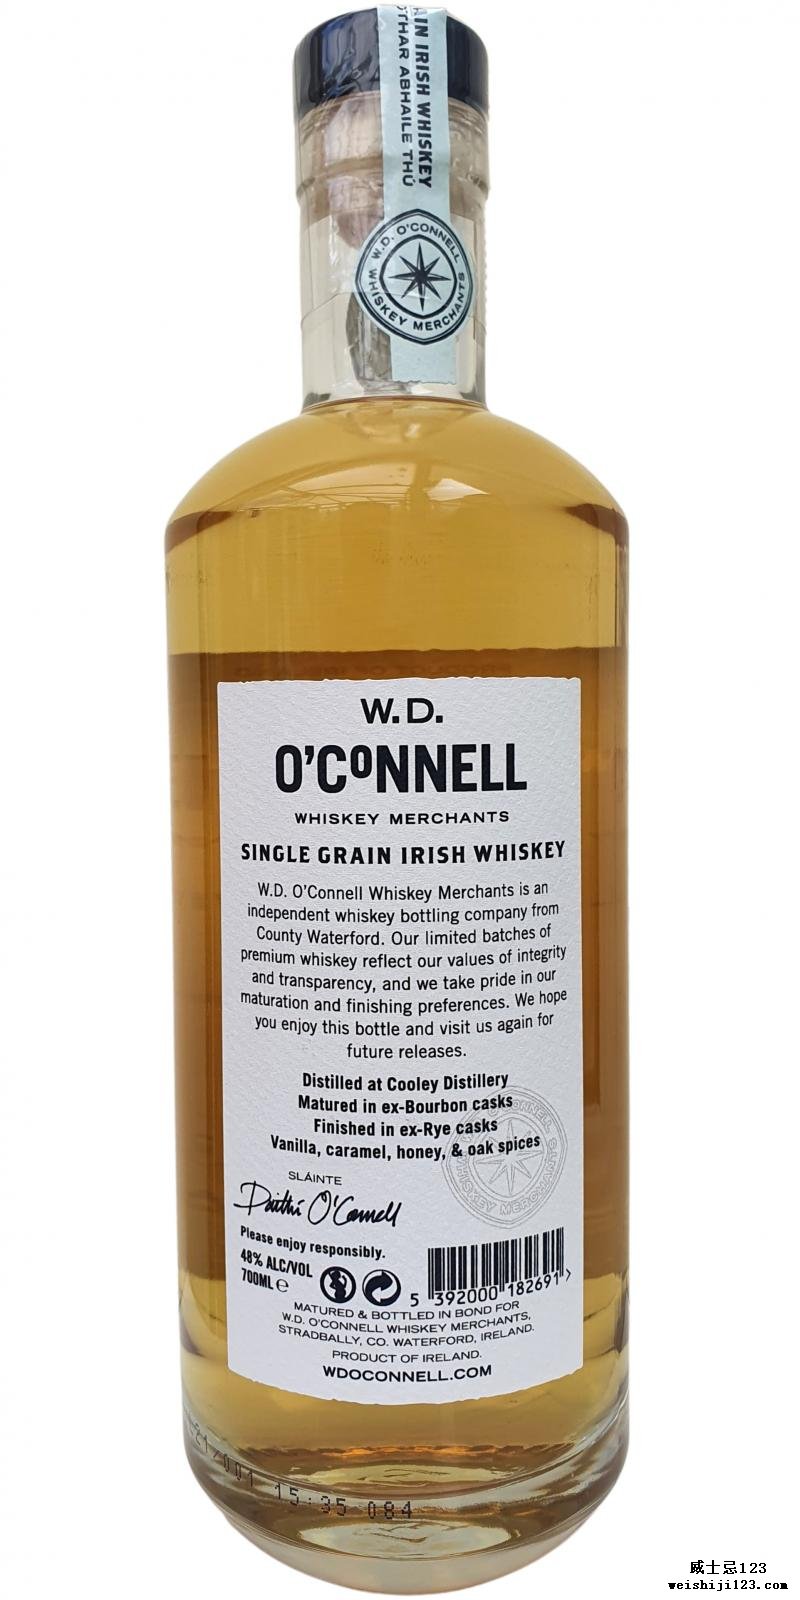 W.D. O'Connell 10-year-old WDO